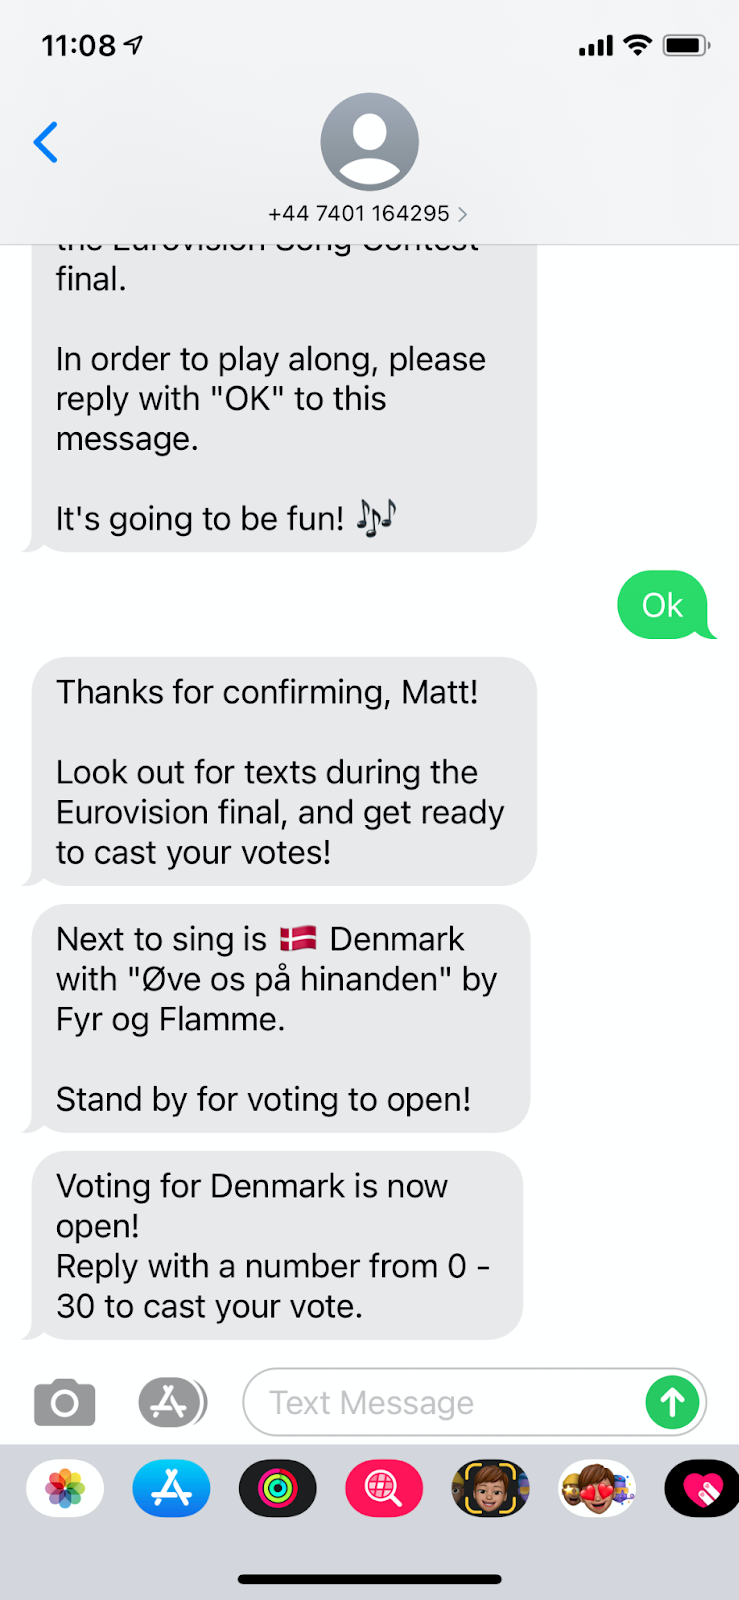 SMS telling you the voting is now open and you can reply with anything between 0 and 30